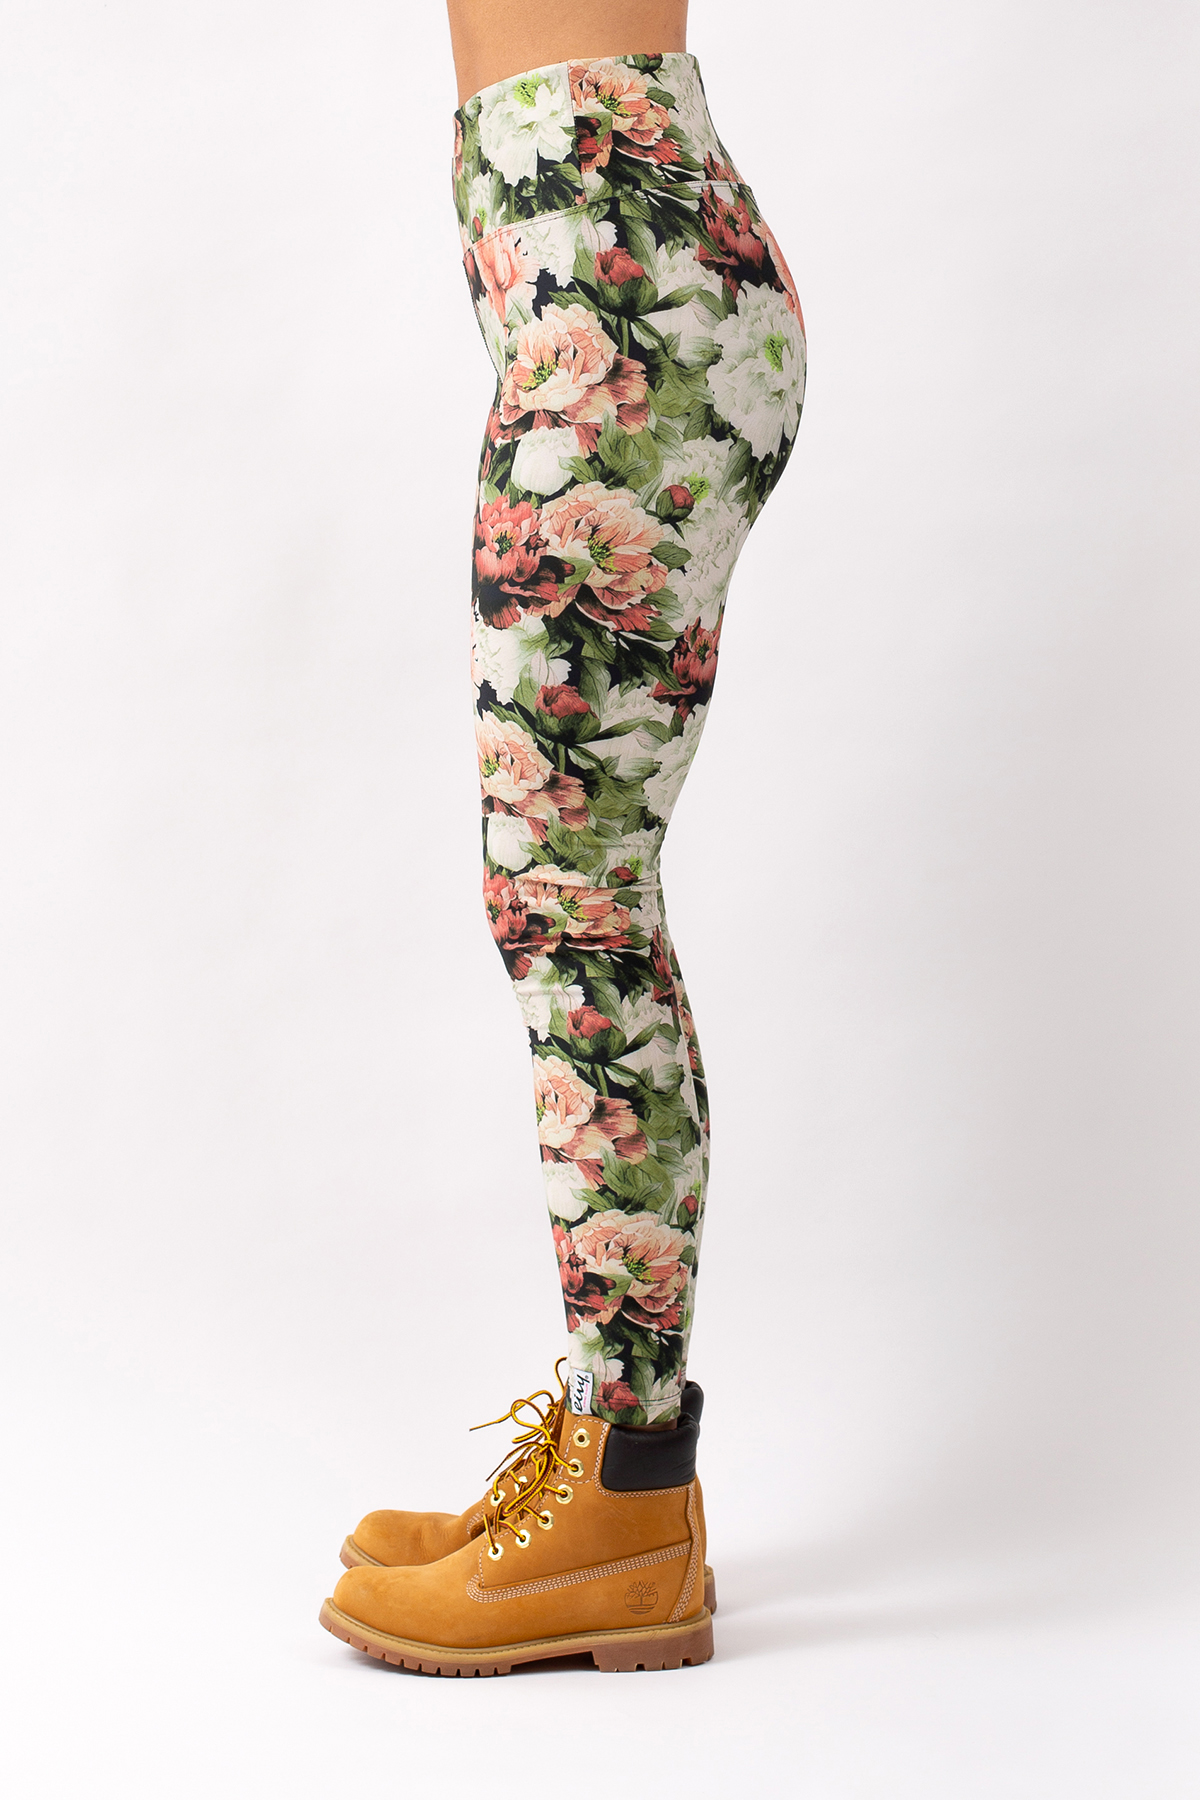 Base Layer | Icecold Tights - Autumn Bloom | XL